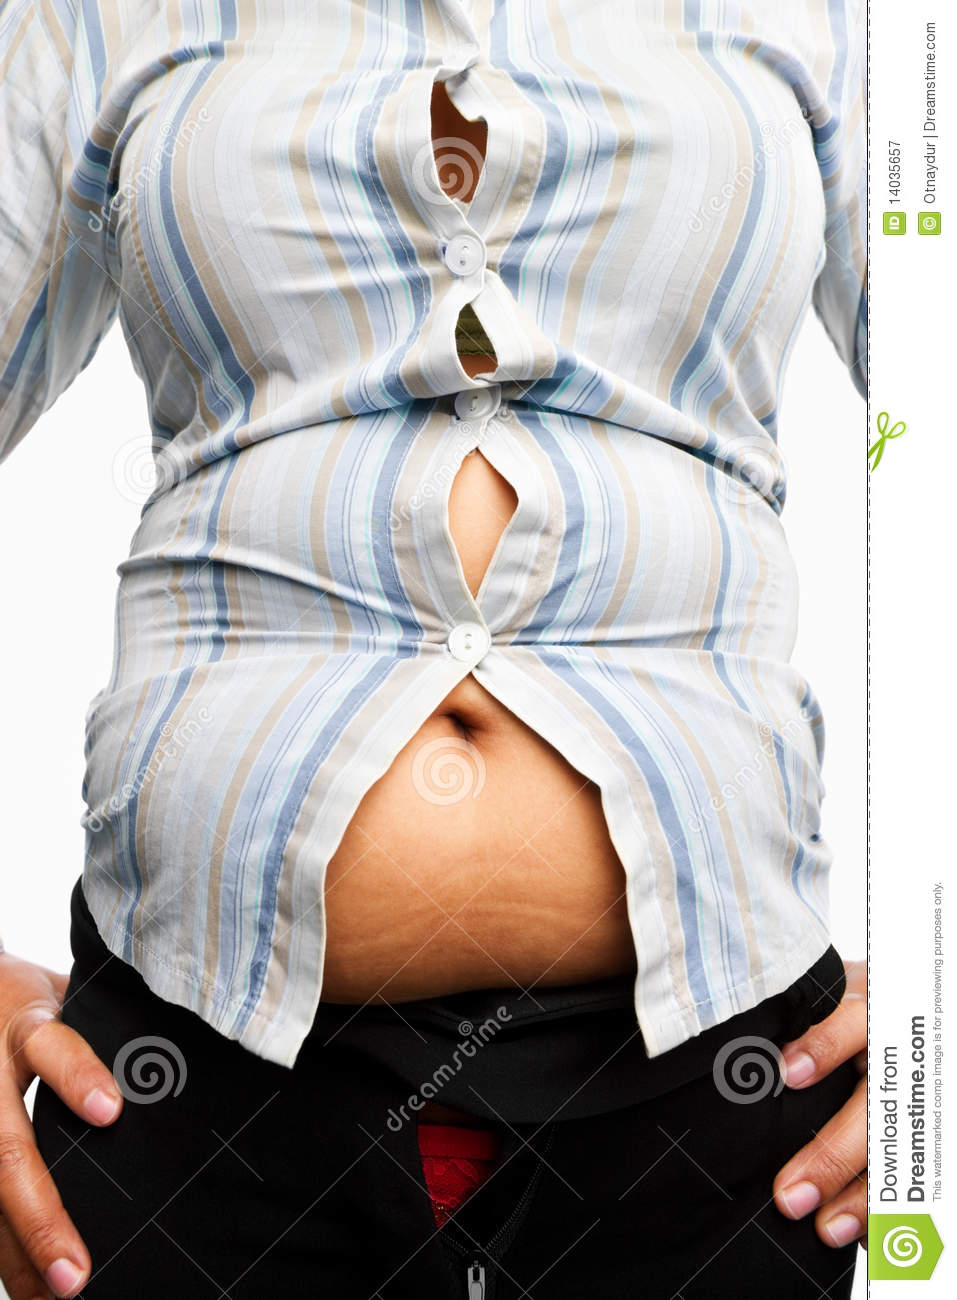 Tight Shirt On Overweight Female Body Royalty Free Stock Photography    